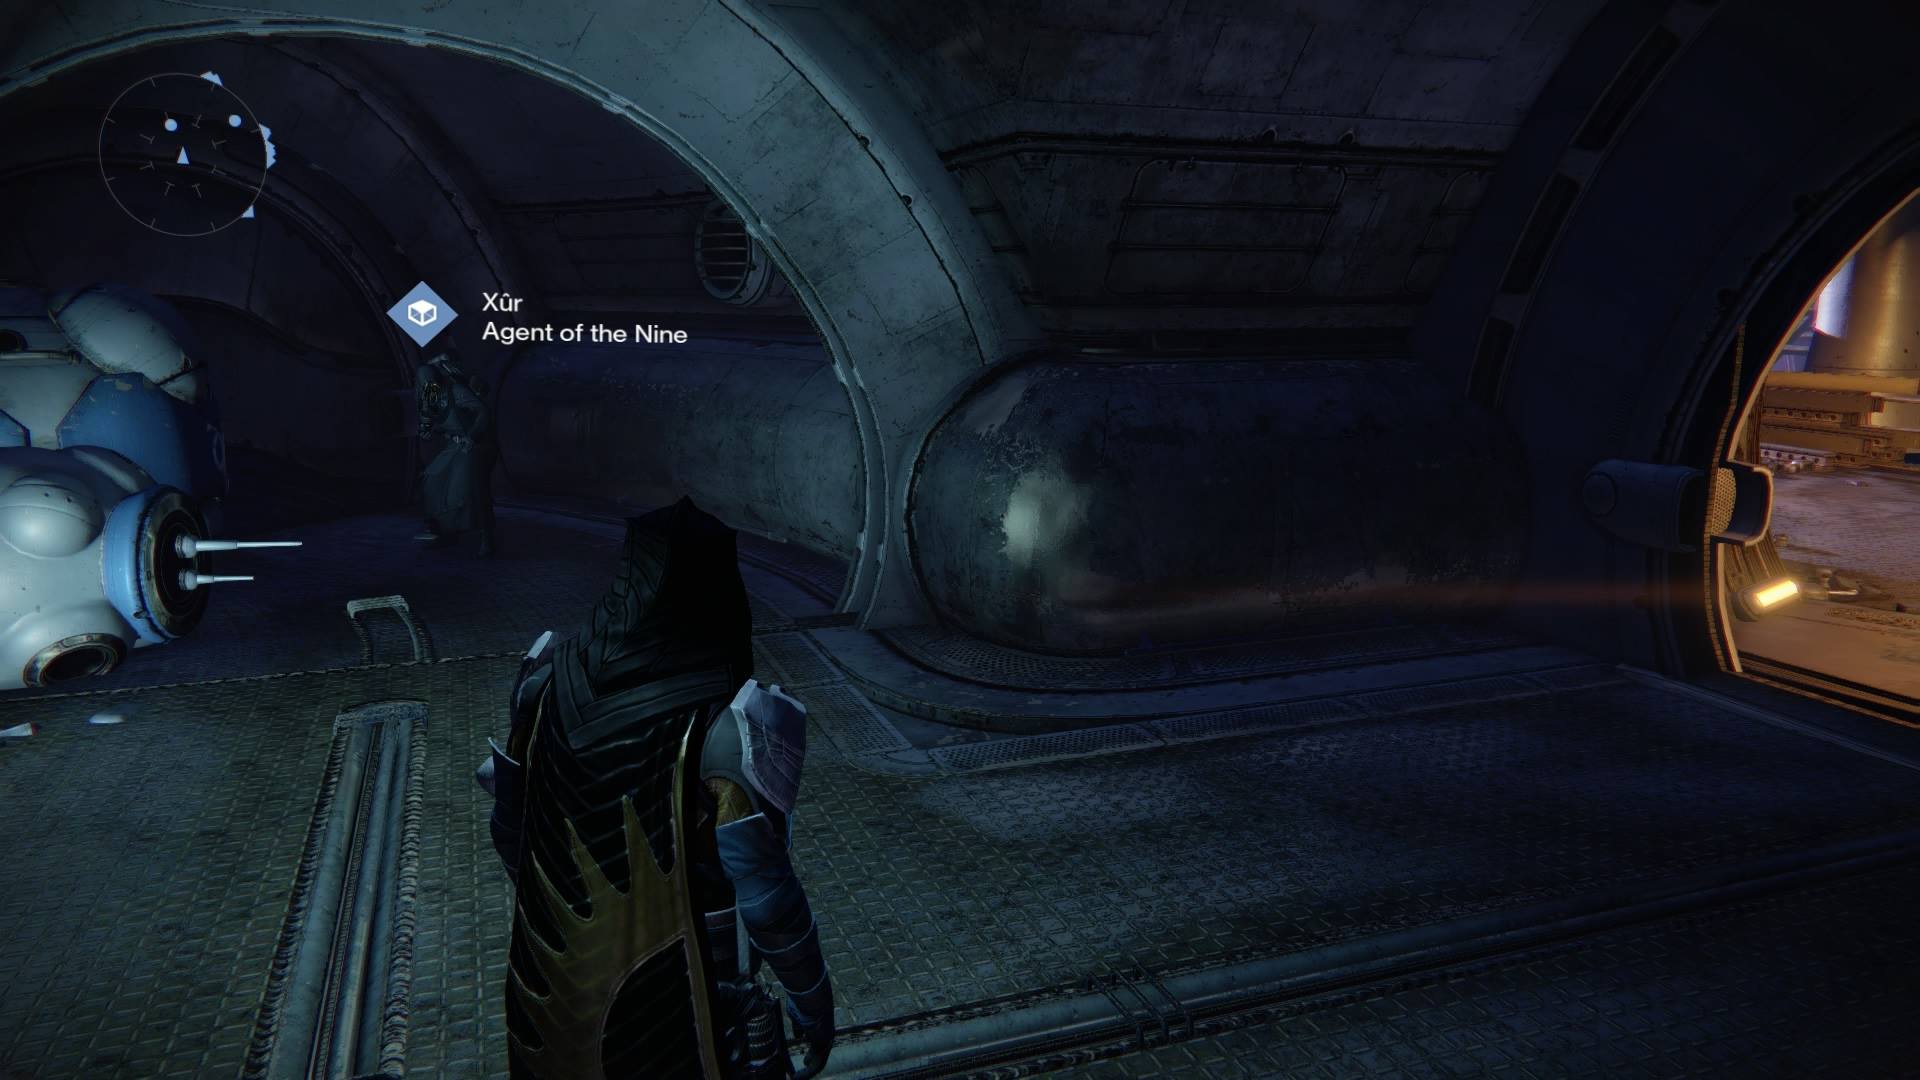 For this week, Xur – Agent of the Nine can be found in the Reef, just past the Bounty Tracker.